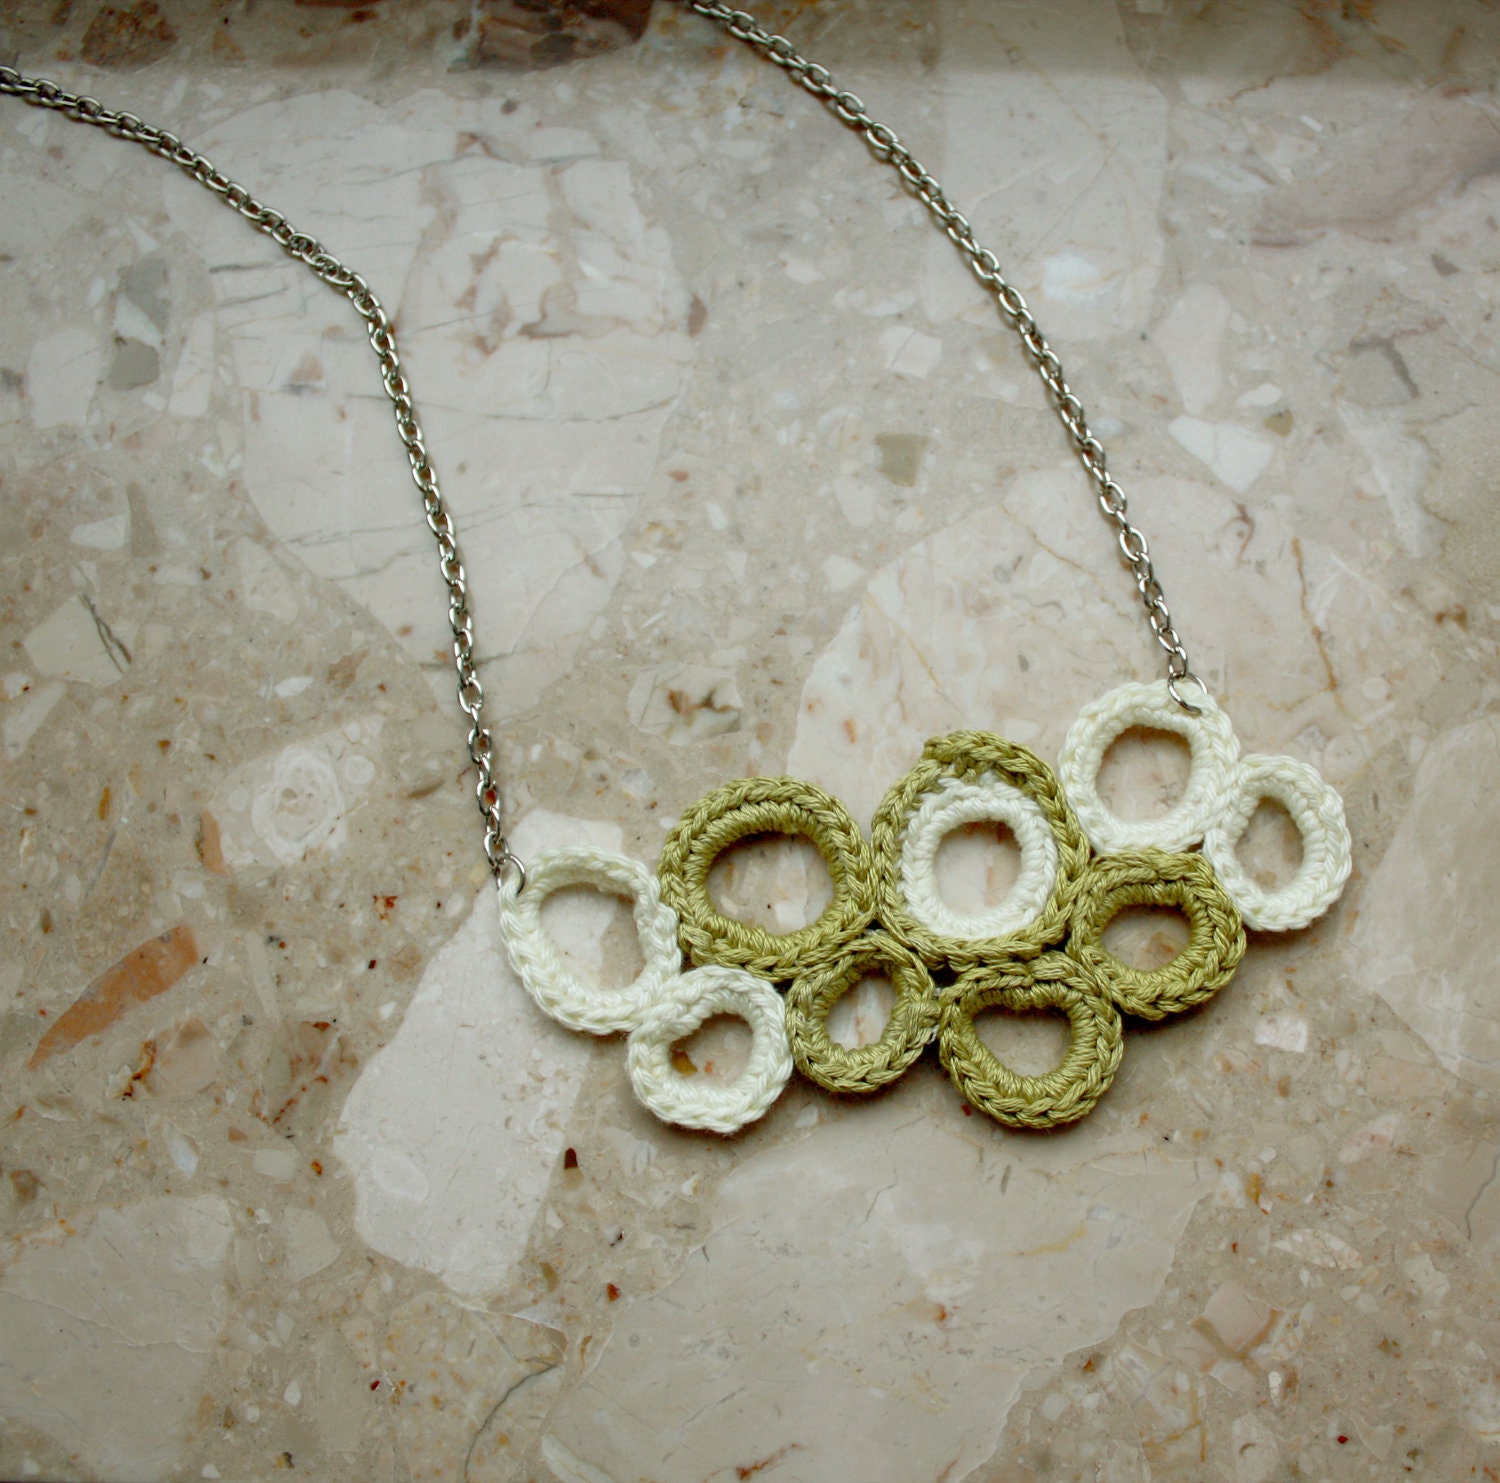 Wearable art Crochet Pendant .. Circles crochet Necklace in Pastel Green and White with chain - - whitewolfsclouds